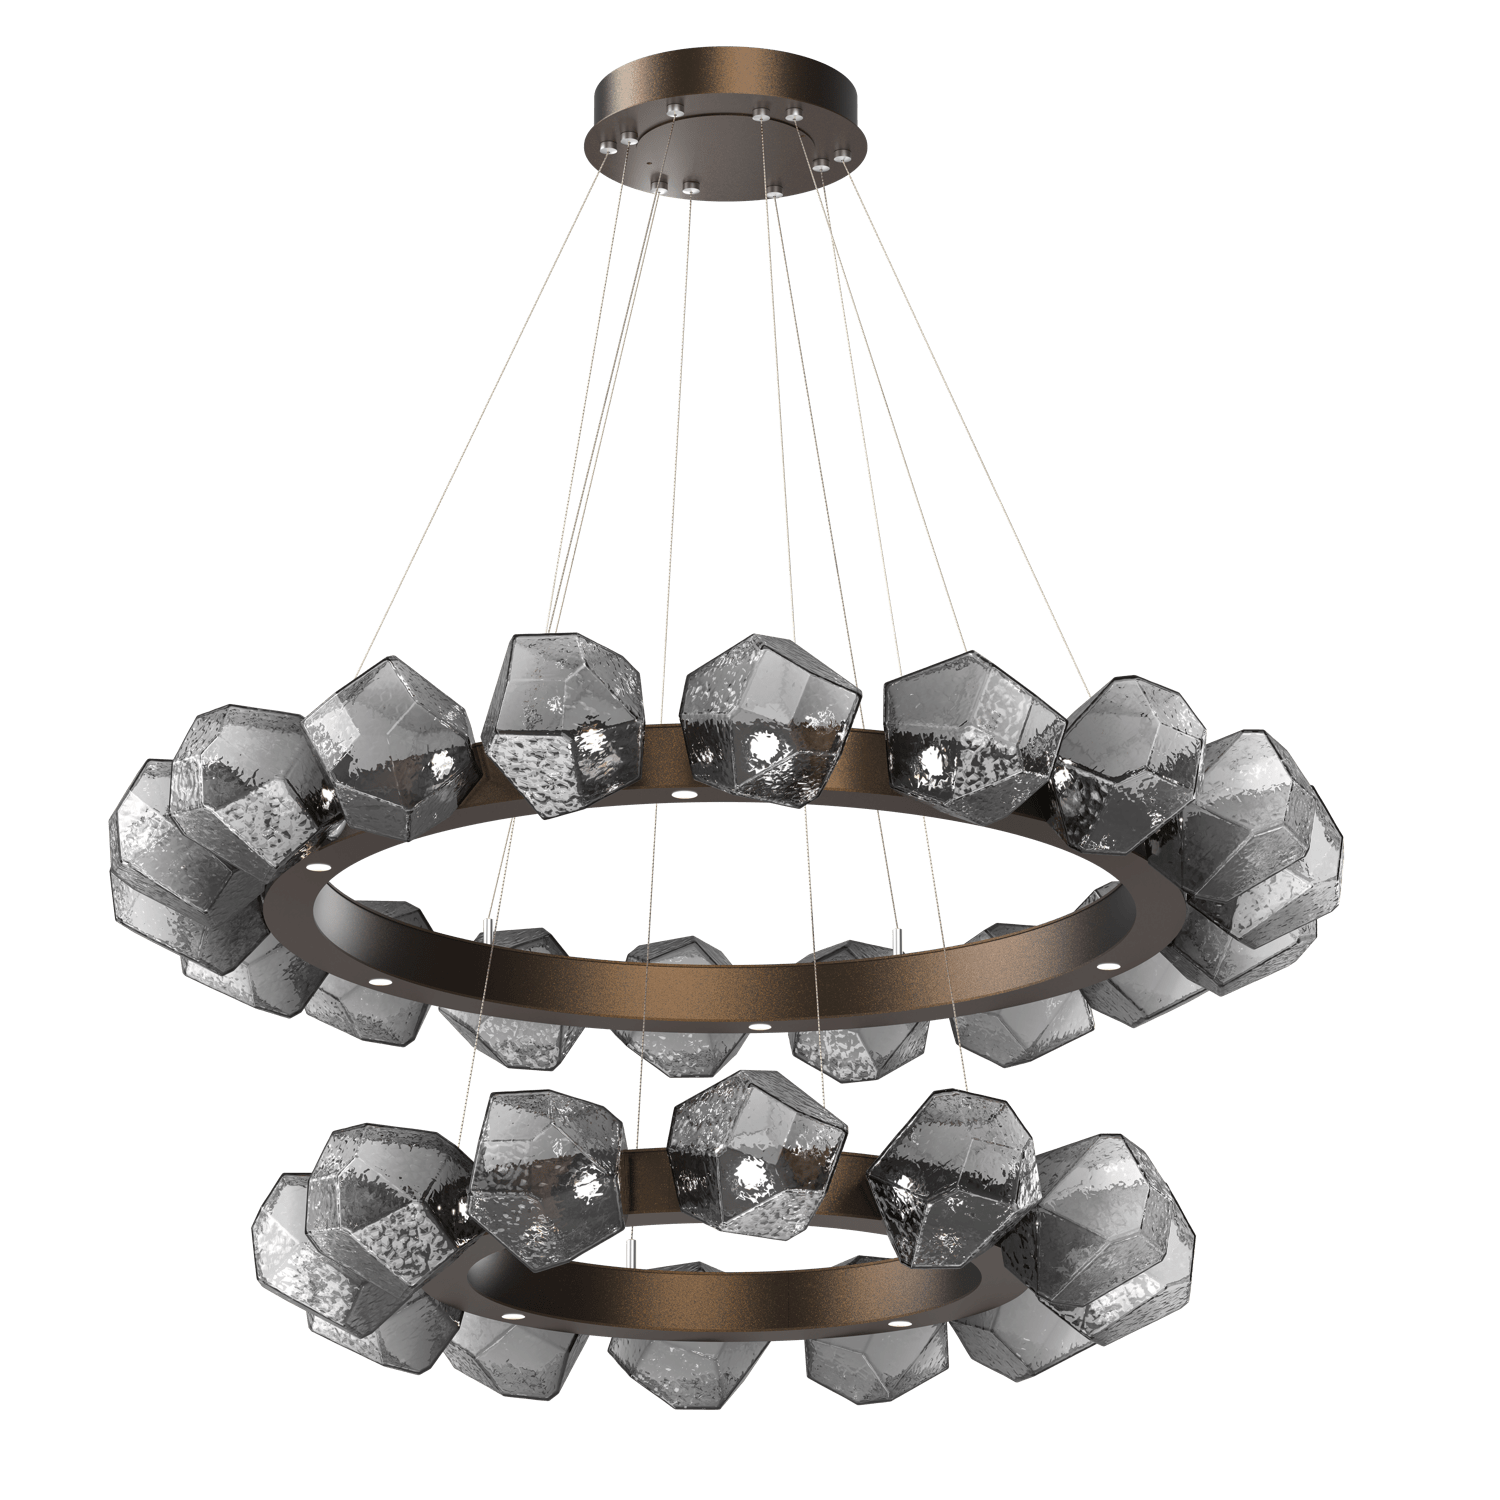 CHB0039-2T-FB-S-Hammerton-Studio-Gem-48-inch-two-tier-radial-ring-chandelier-with-flat-bronze-finish-and-smoke-blown-glass-shades-and-LED-lamping